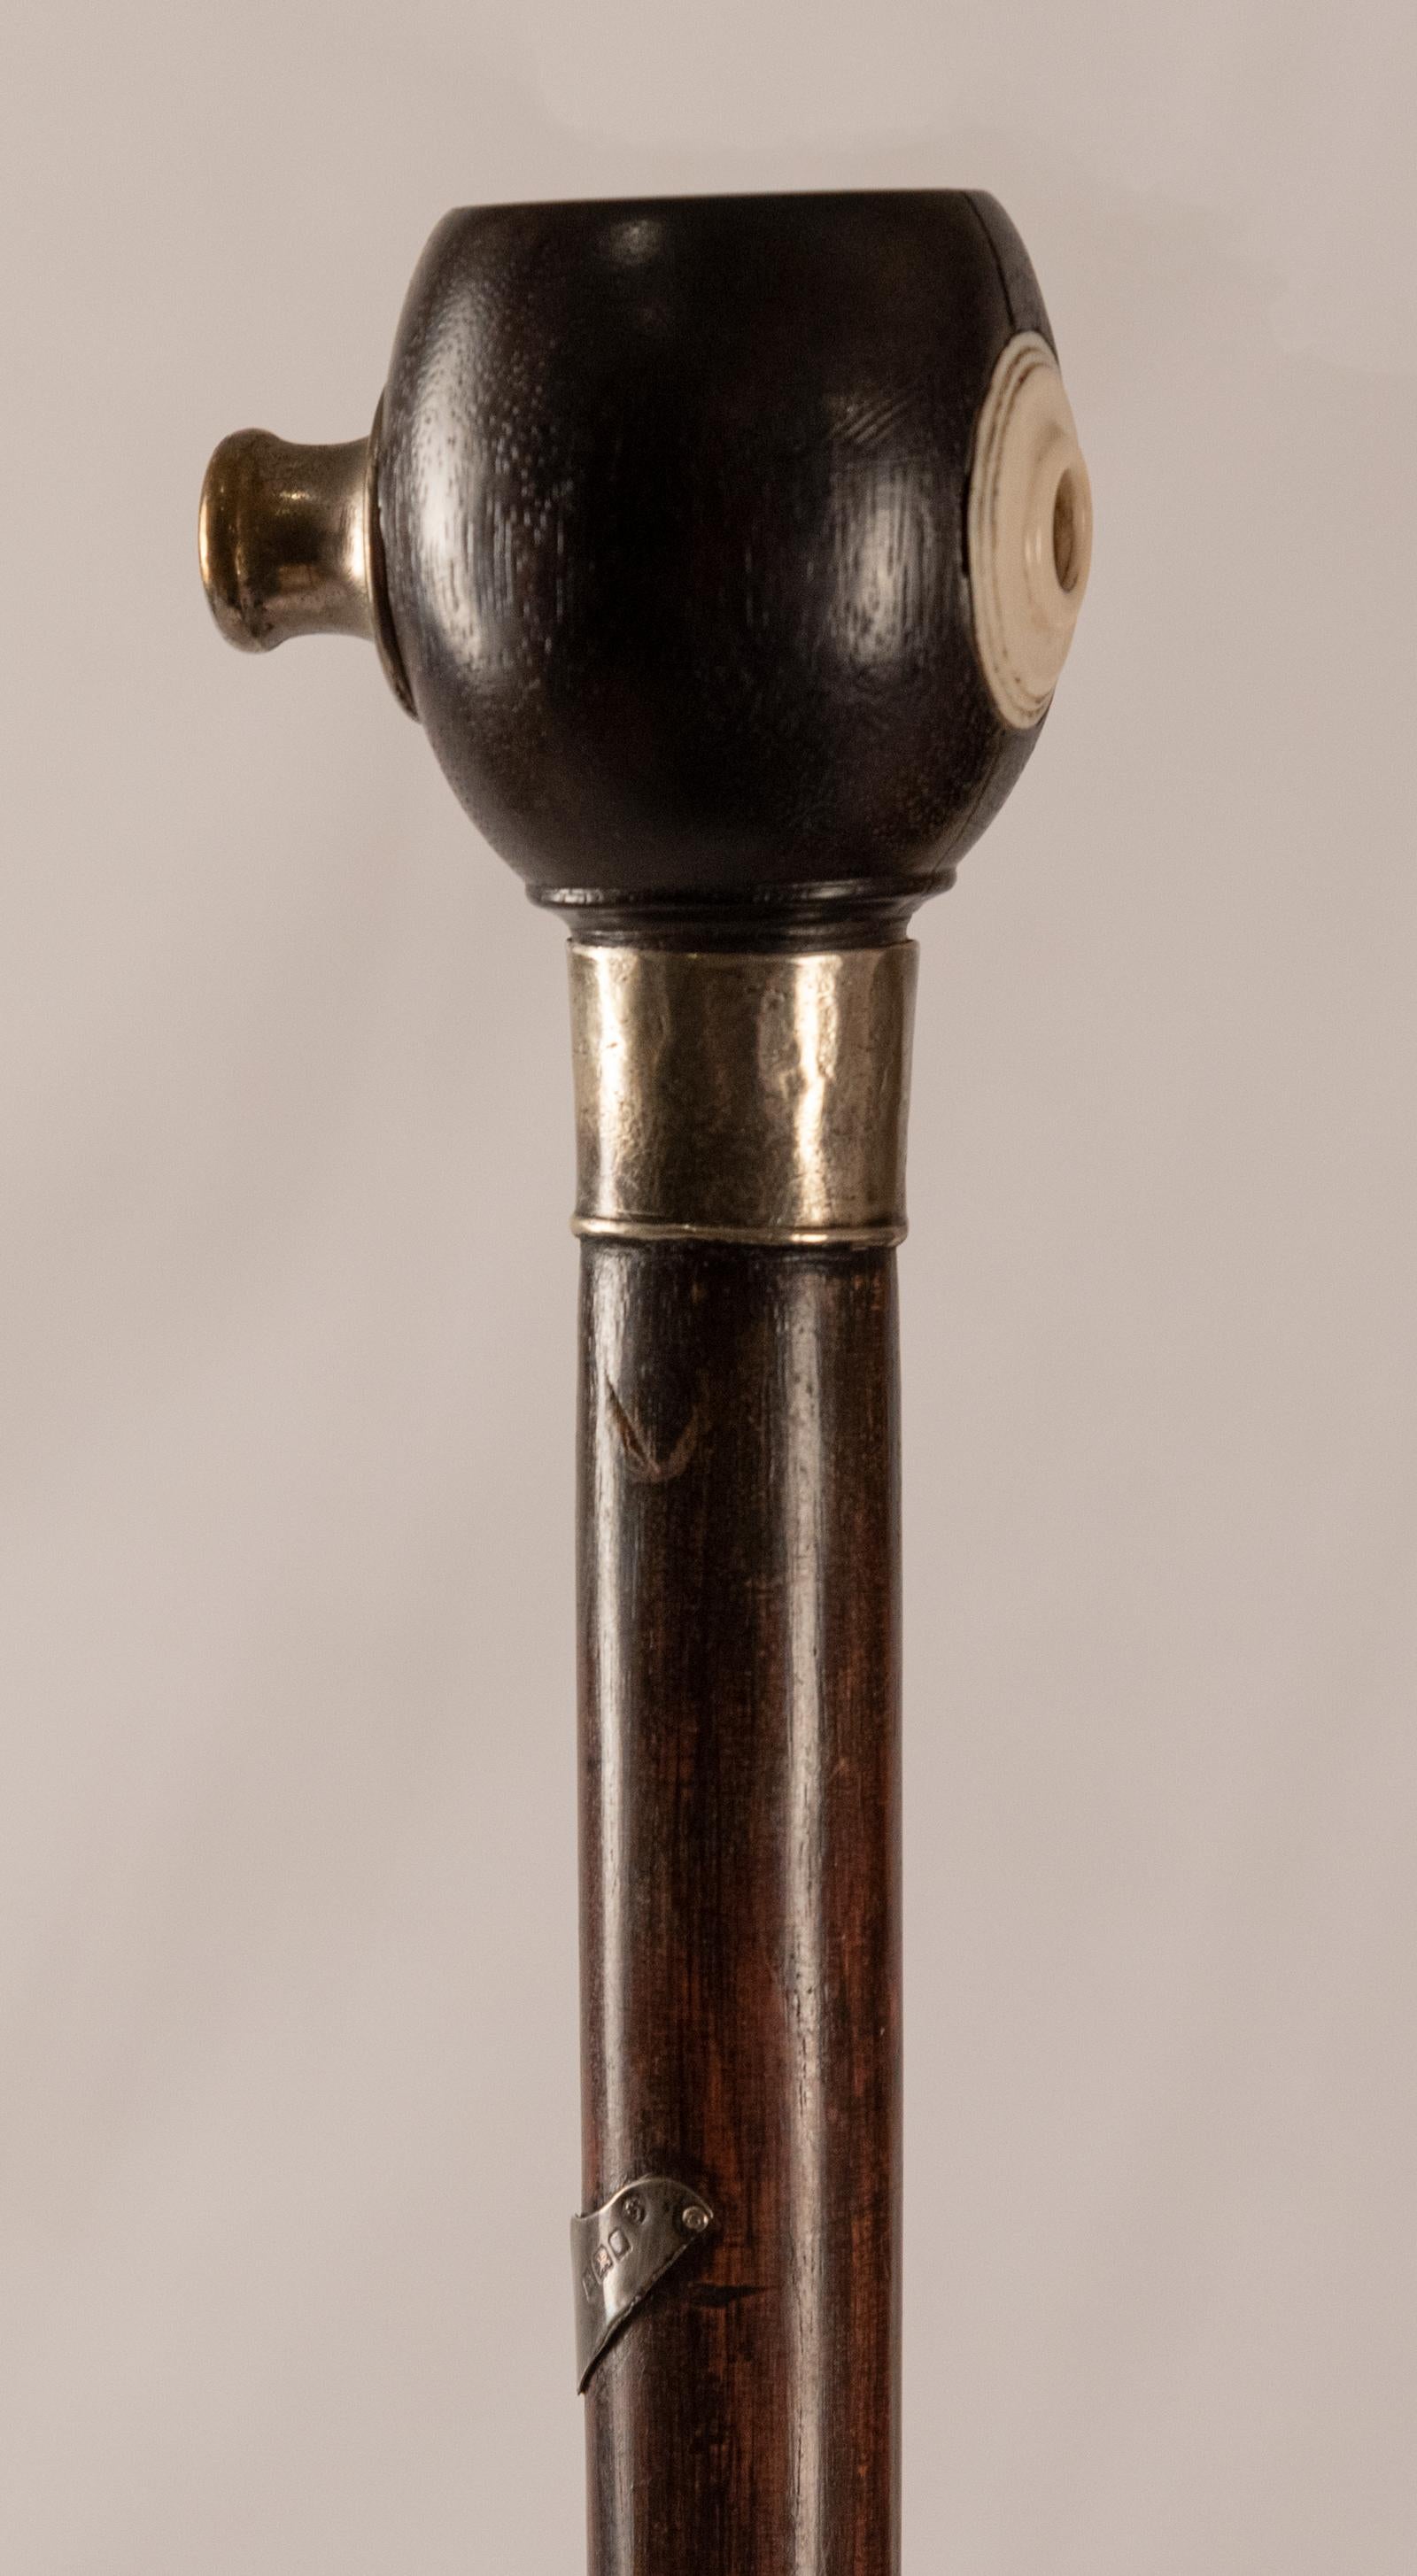 Rosewood and sterling walking stick with penny whistle, circa 1900

England

Measures: 35 x 2.5 x 2 in.